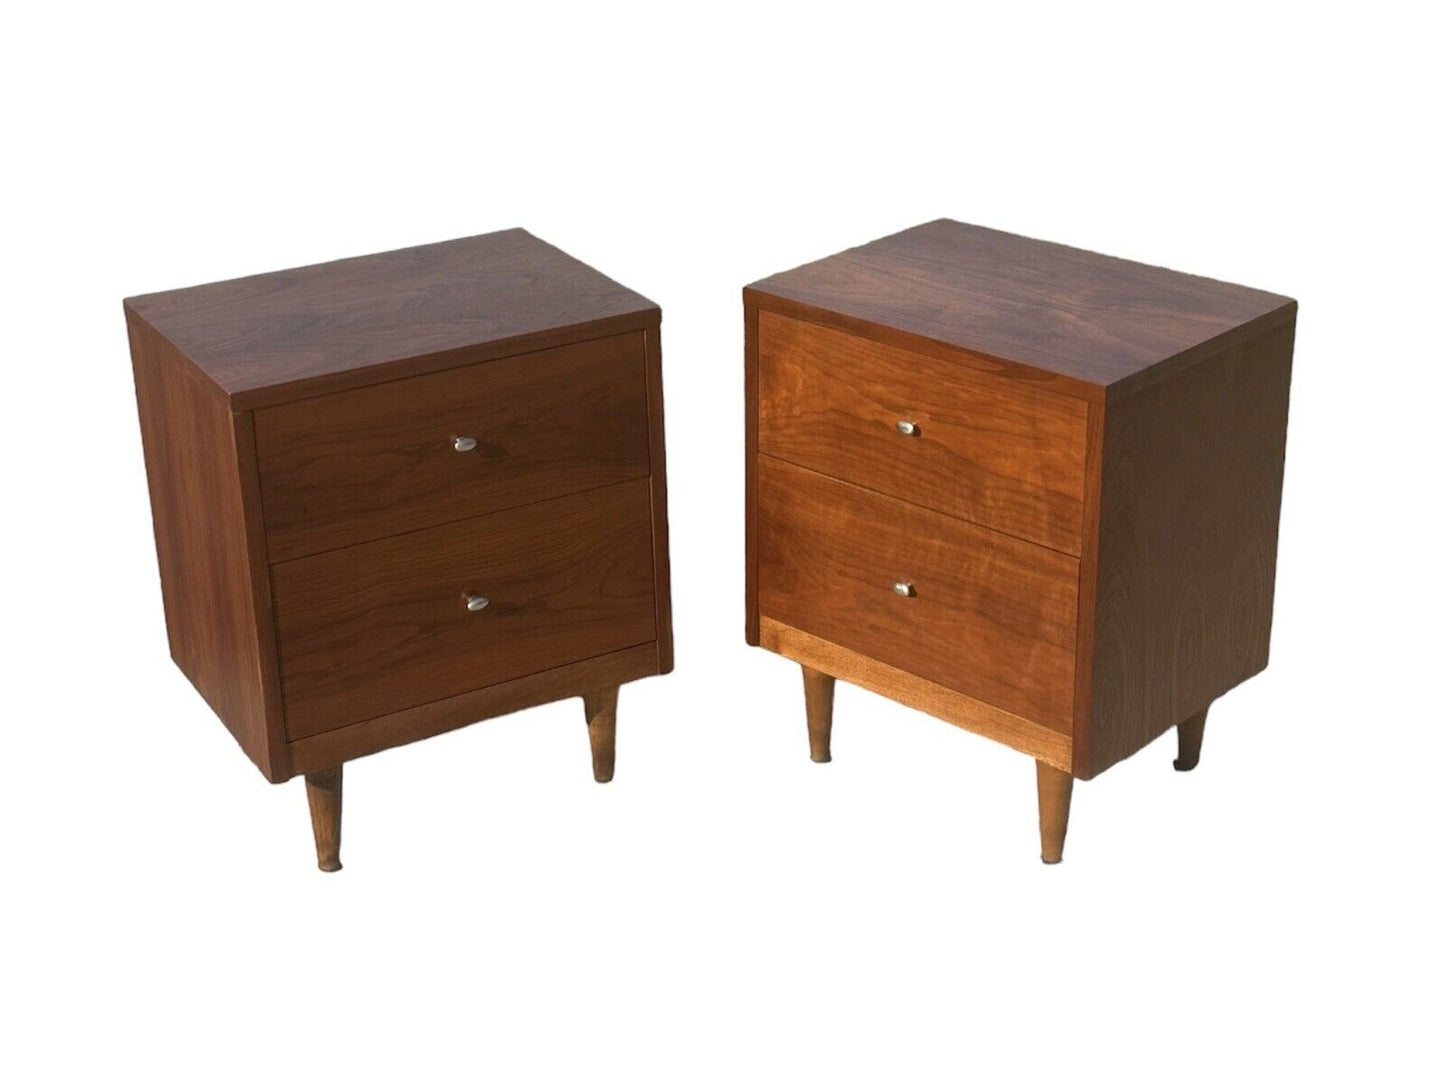 Pair of Mid-century Modern Walnut Two Drawer Nightstands by Crescent Furniture